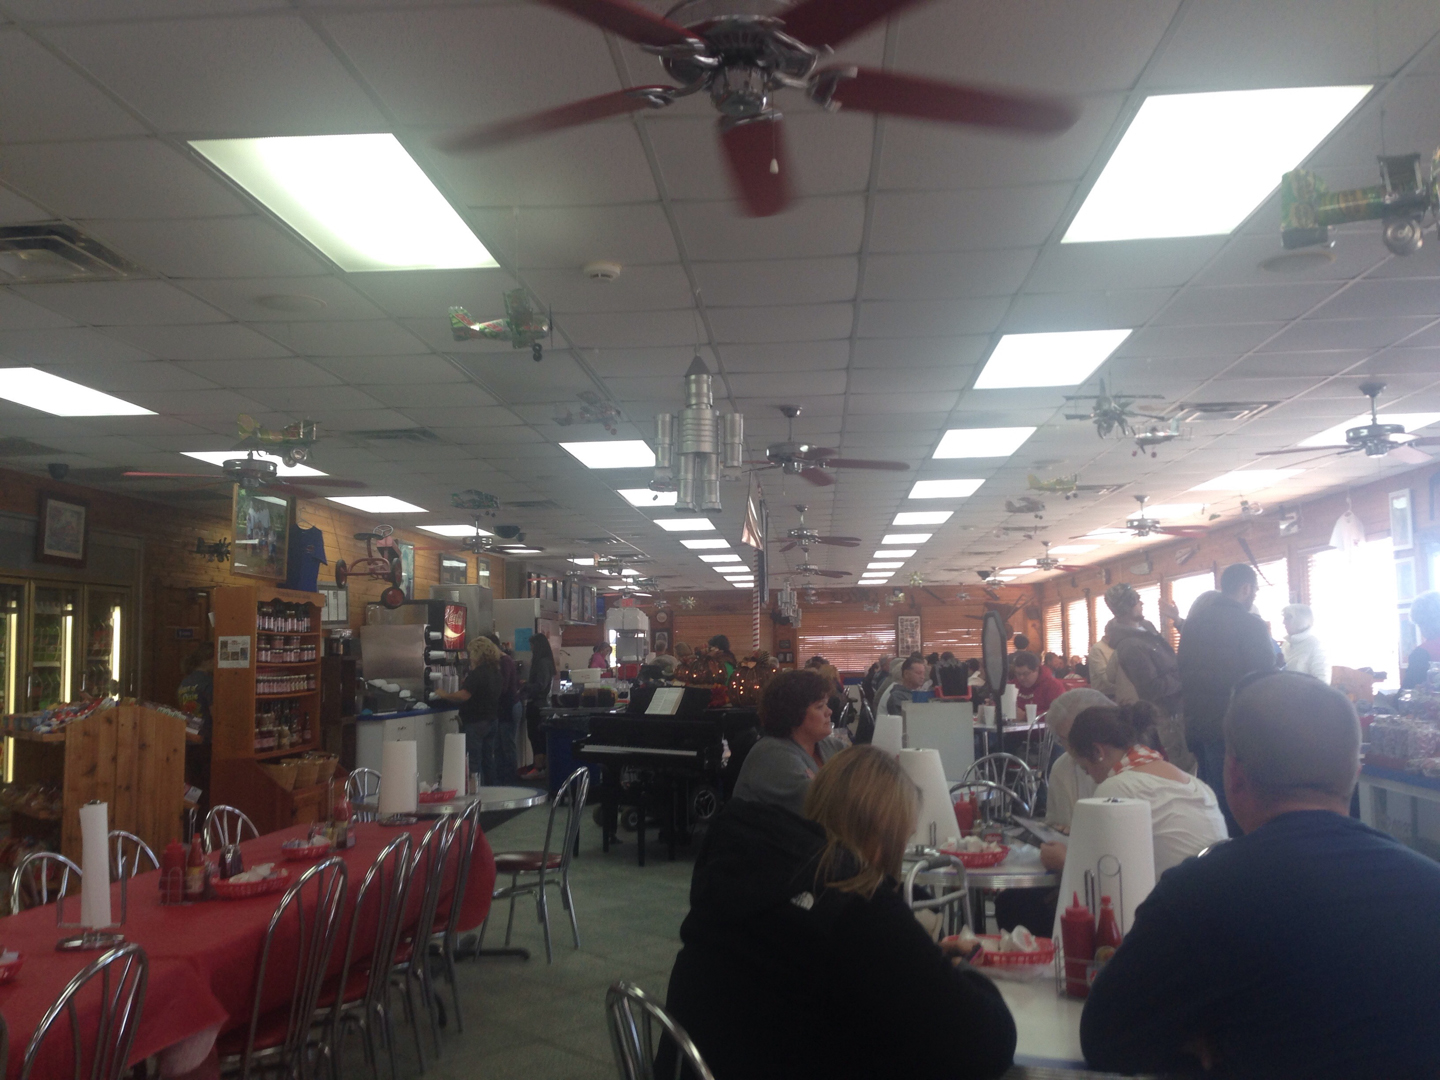 The view inside the diner. Classkc